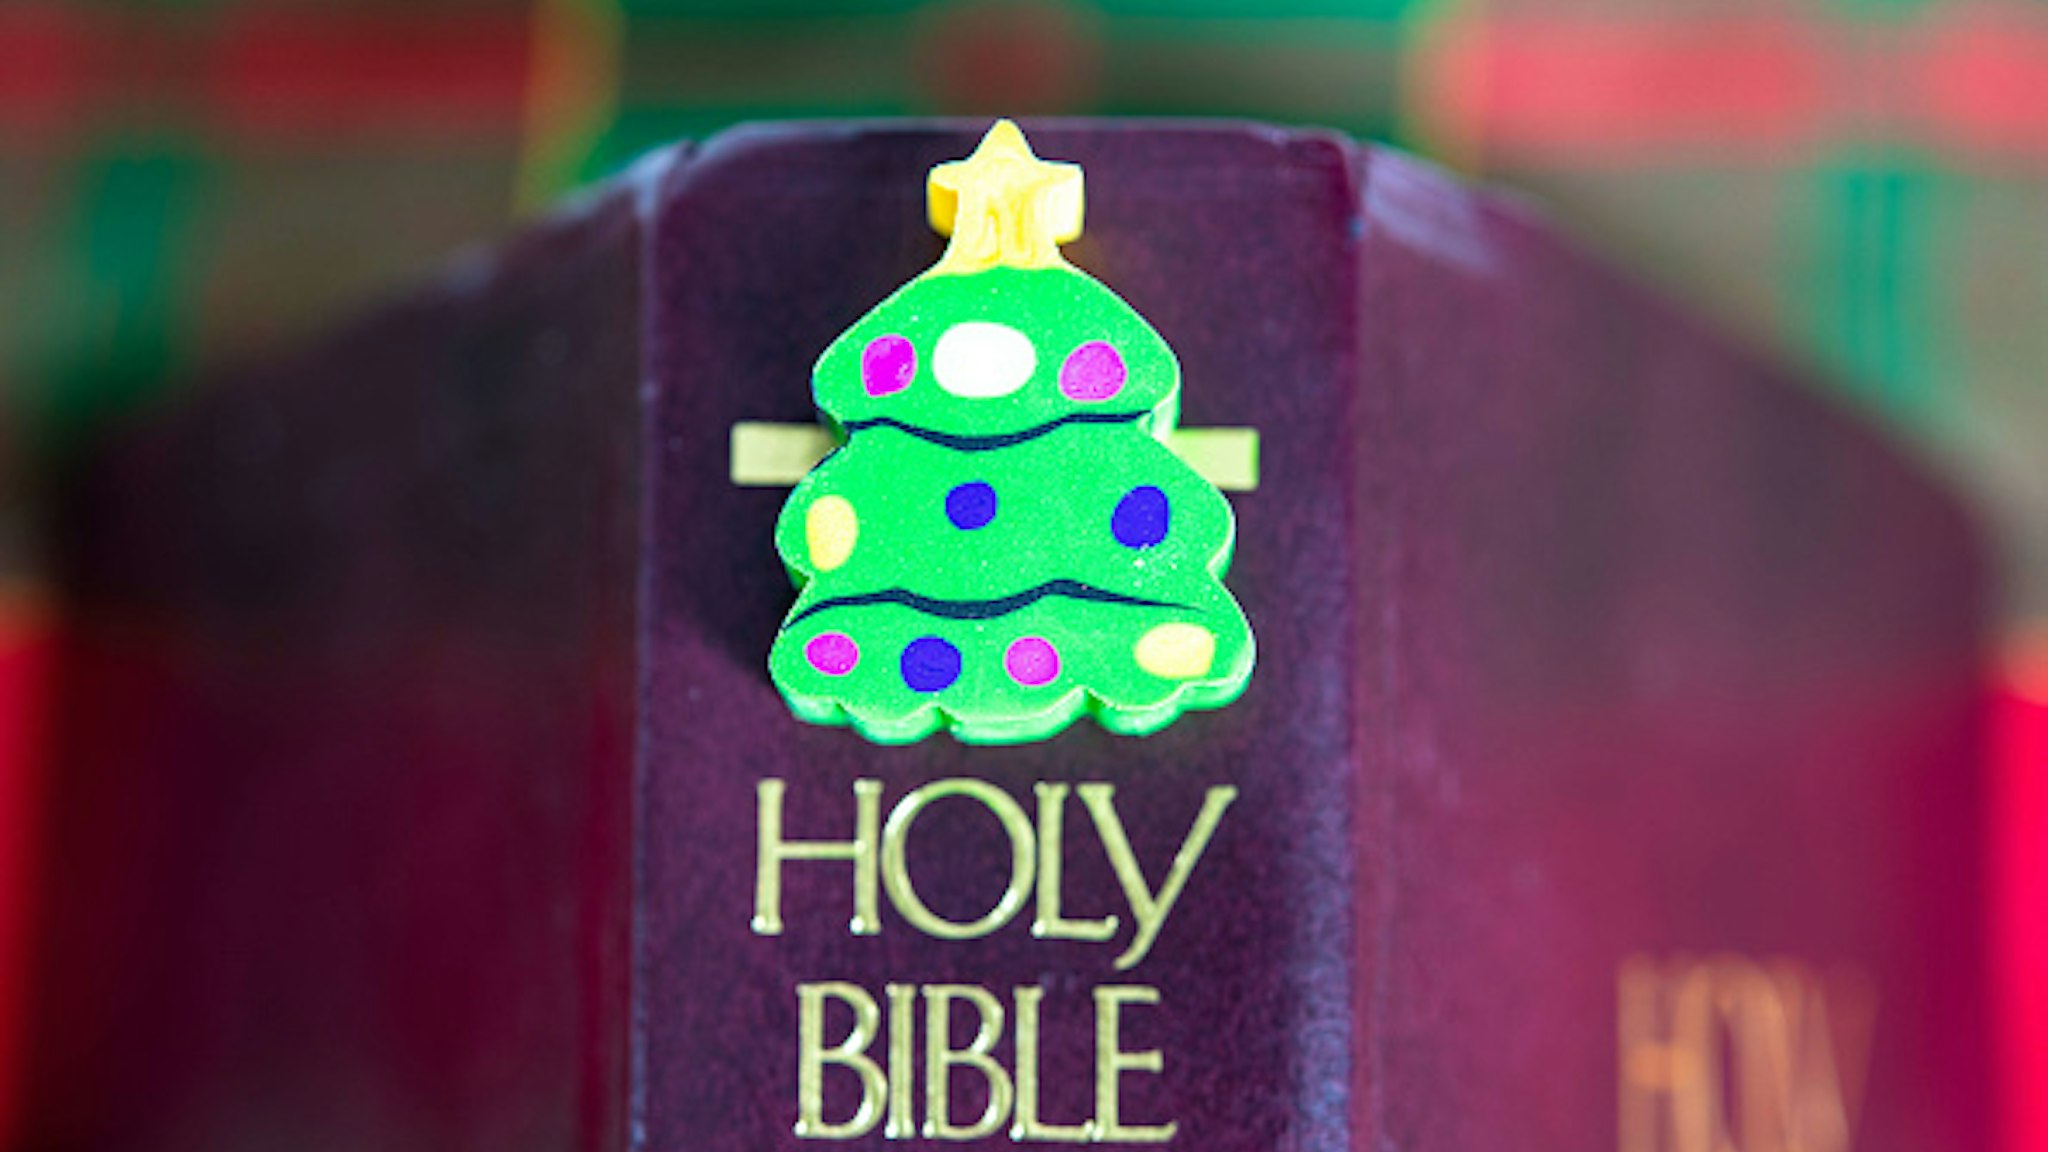 TORONTO, ONTARIO, CANADA - 2018/12/02: A small Christmas tree object over the Holy Bible. Christian origins of the Christmas holiday.